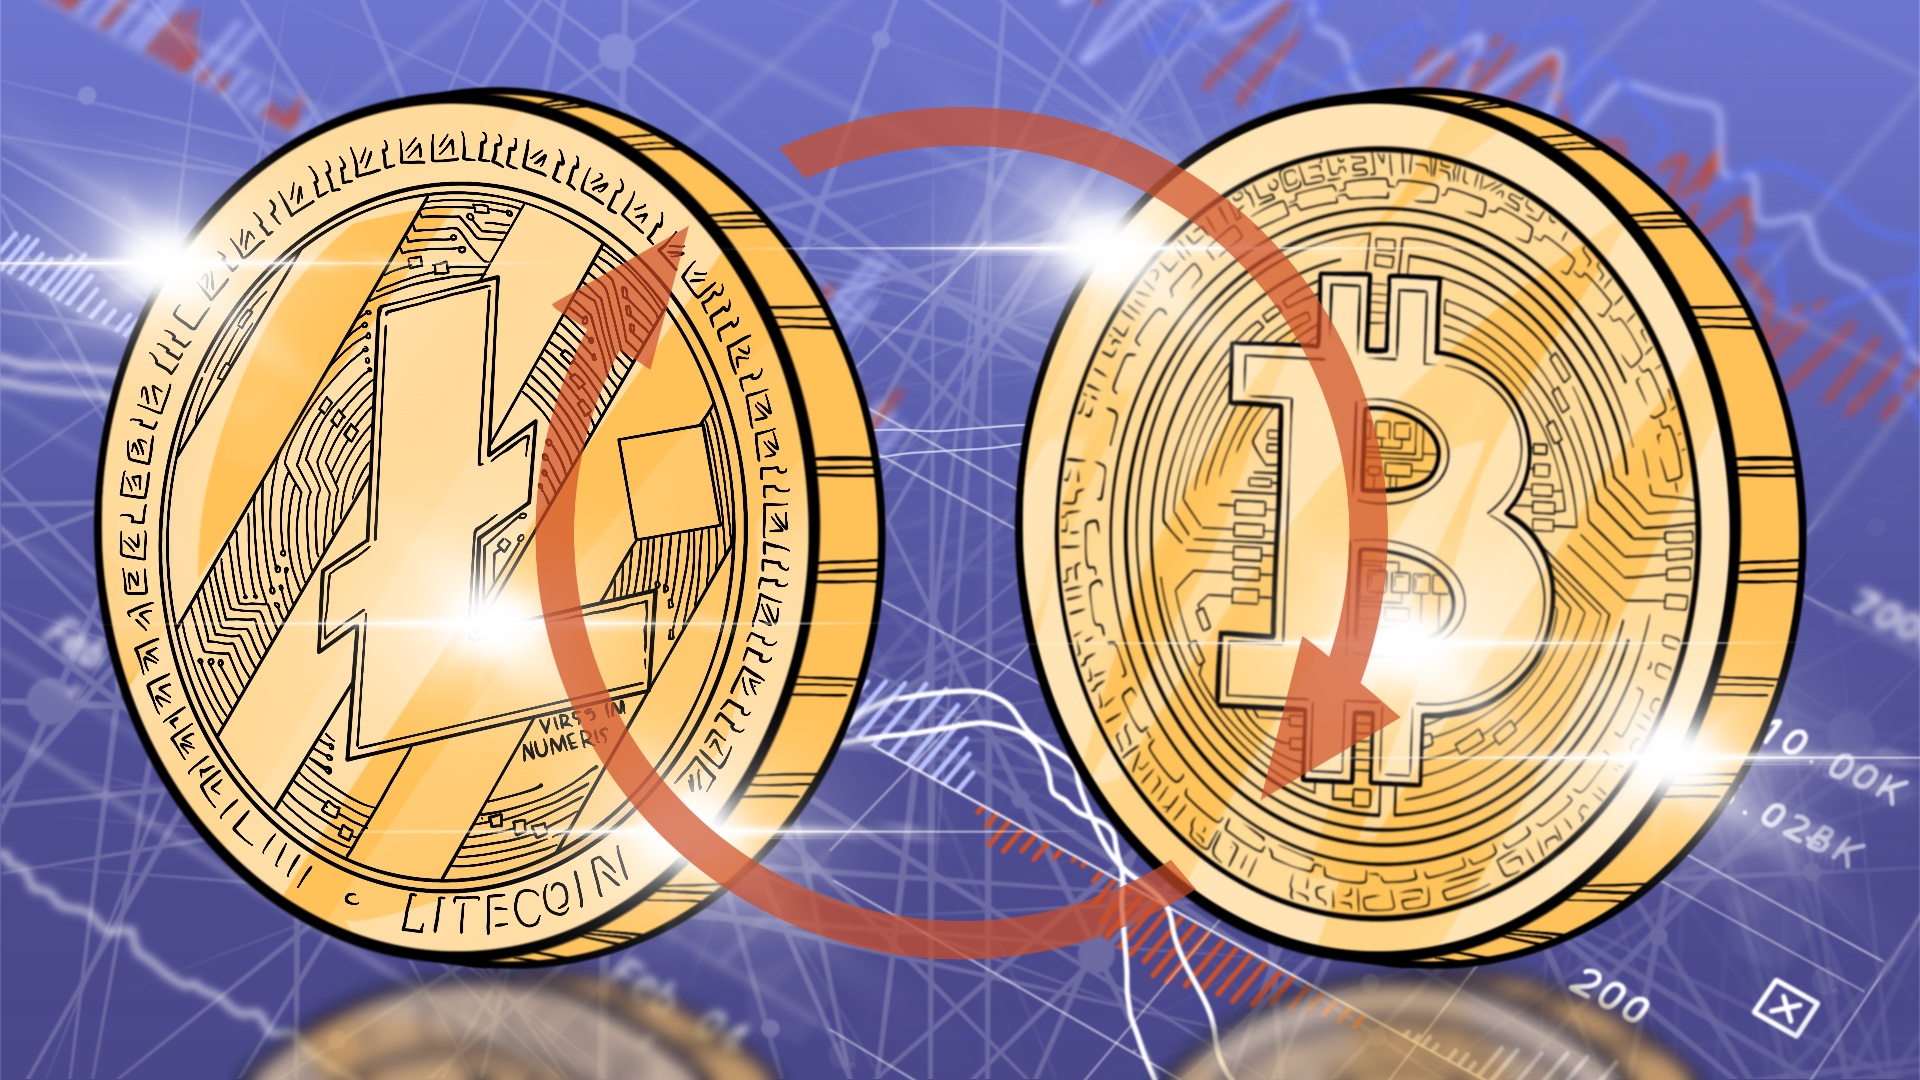 Exchange Litecoin to Bitcoin – The How and Why